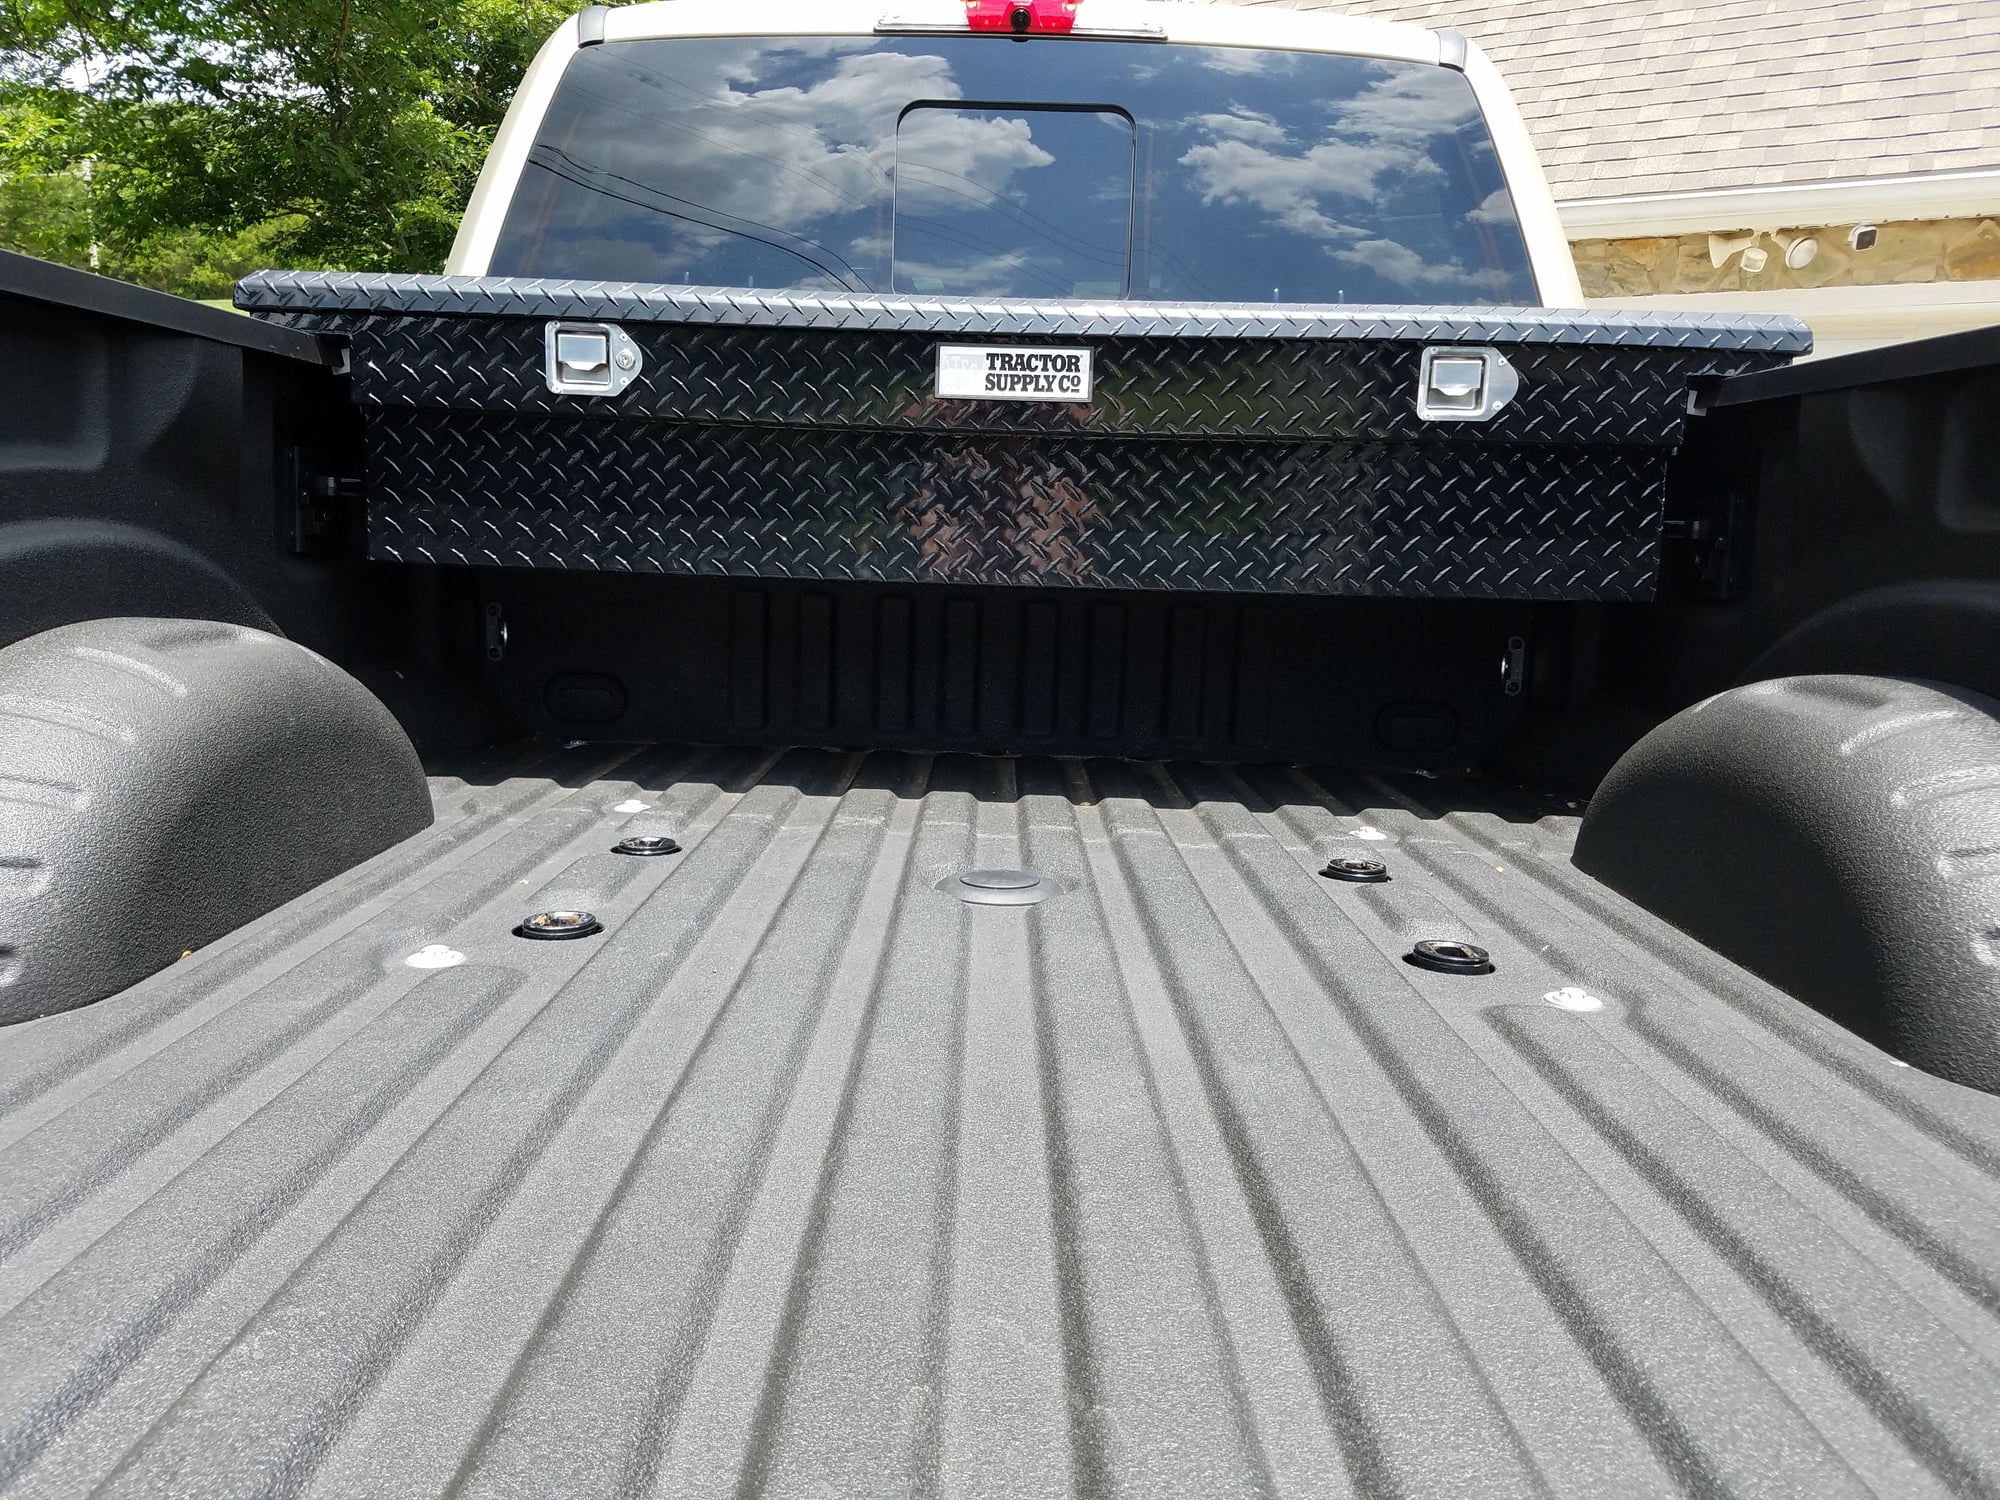 2017 F250 5th wheel hitch prep package - Ford Truck Enthusiasts Forums 2012 Ford F250 5th Wheel Hitch Prep Package